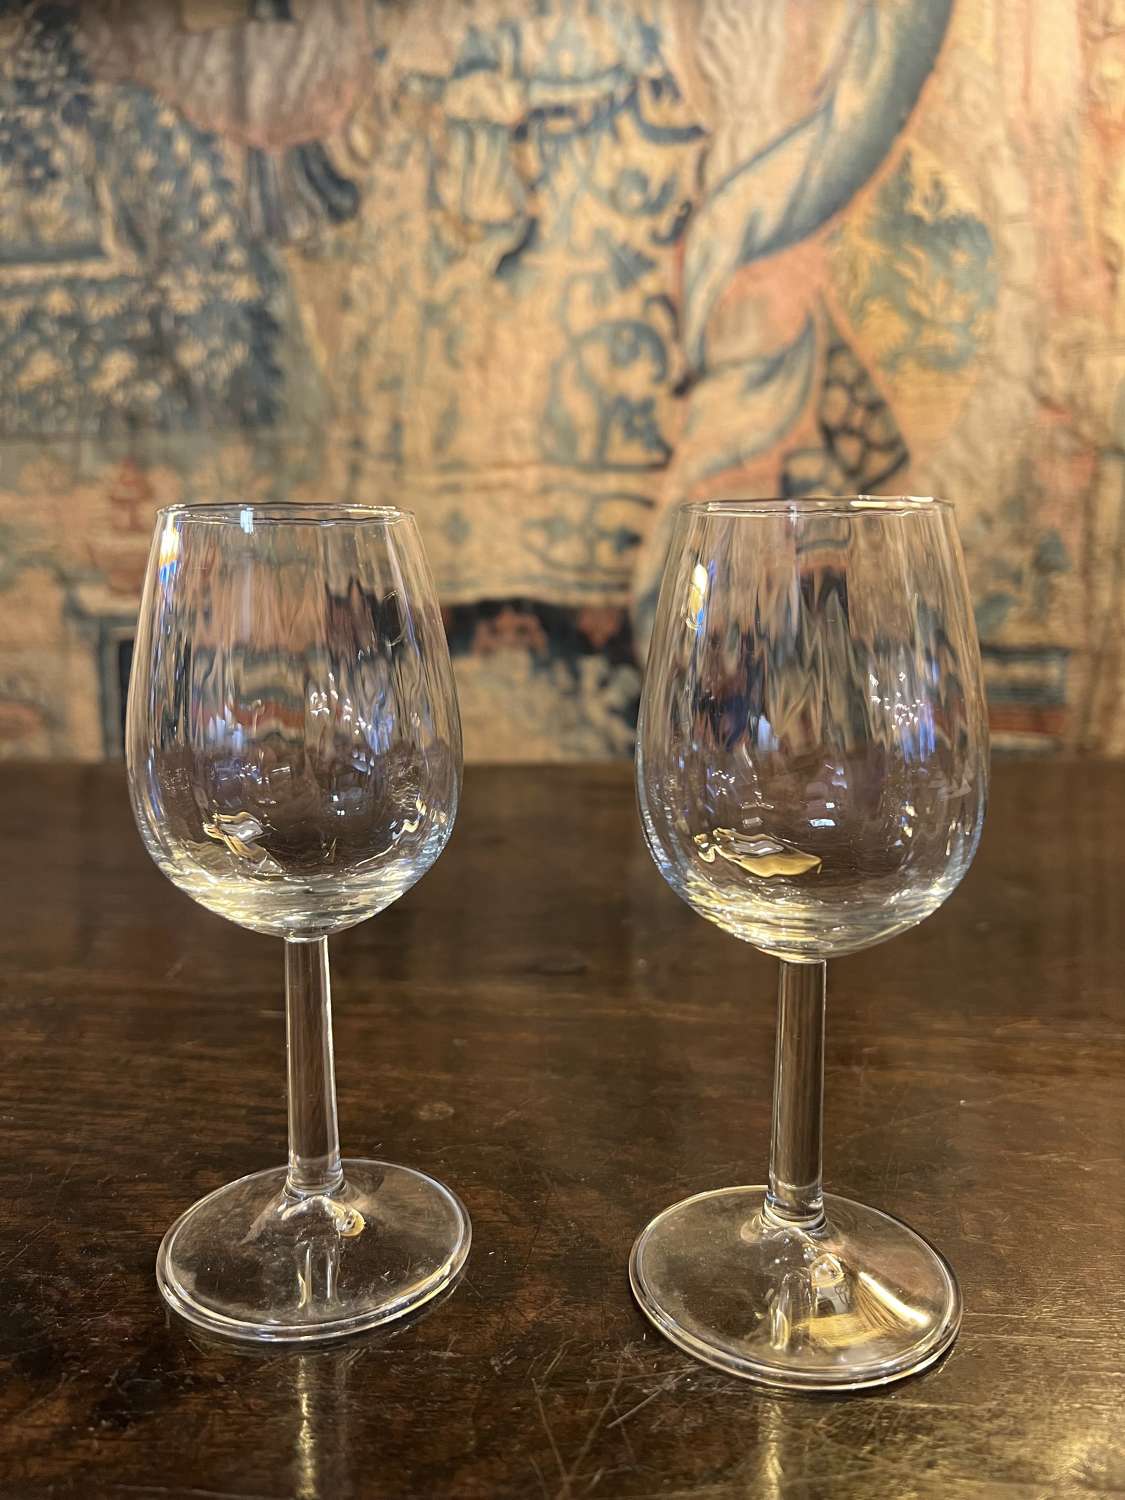 A pair of small wine glasses